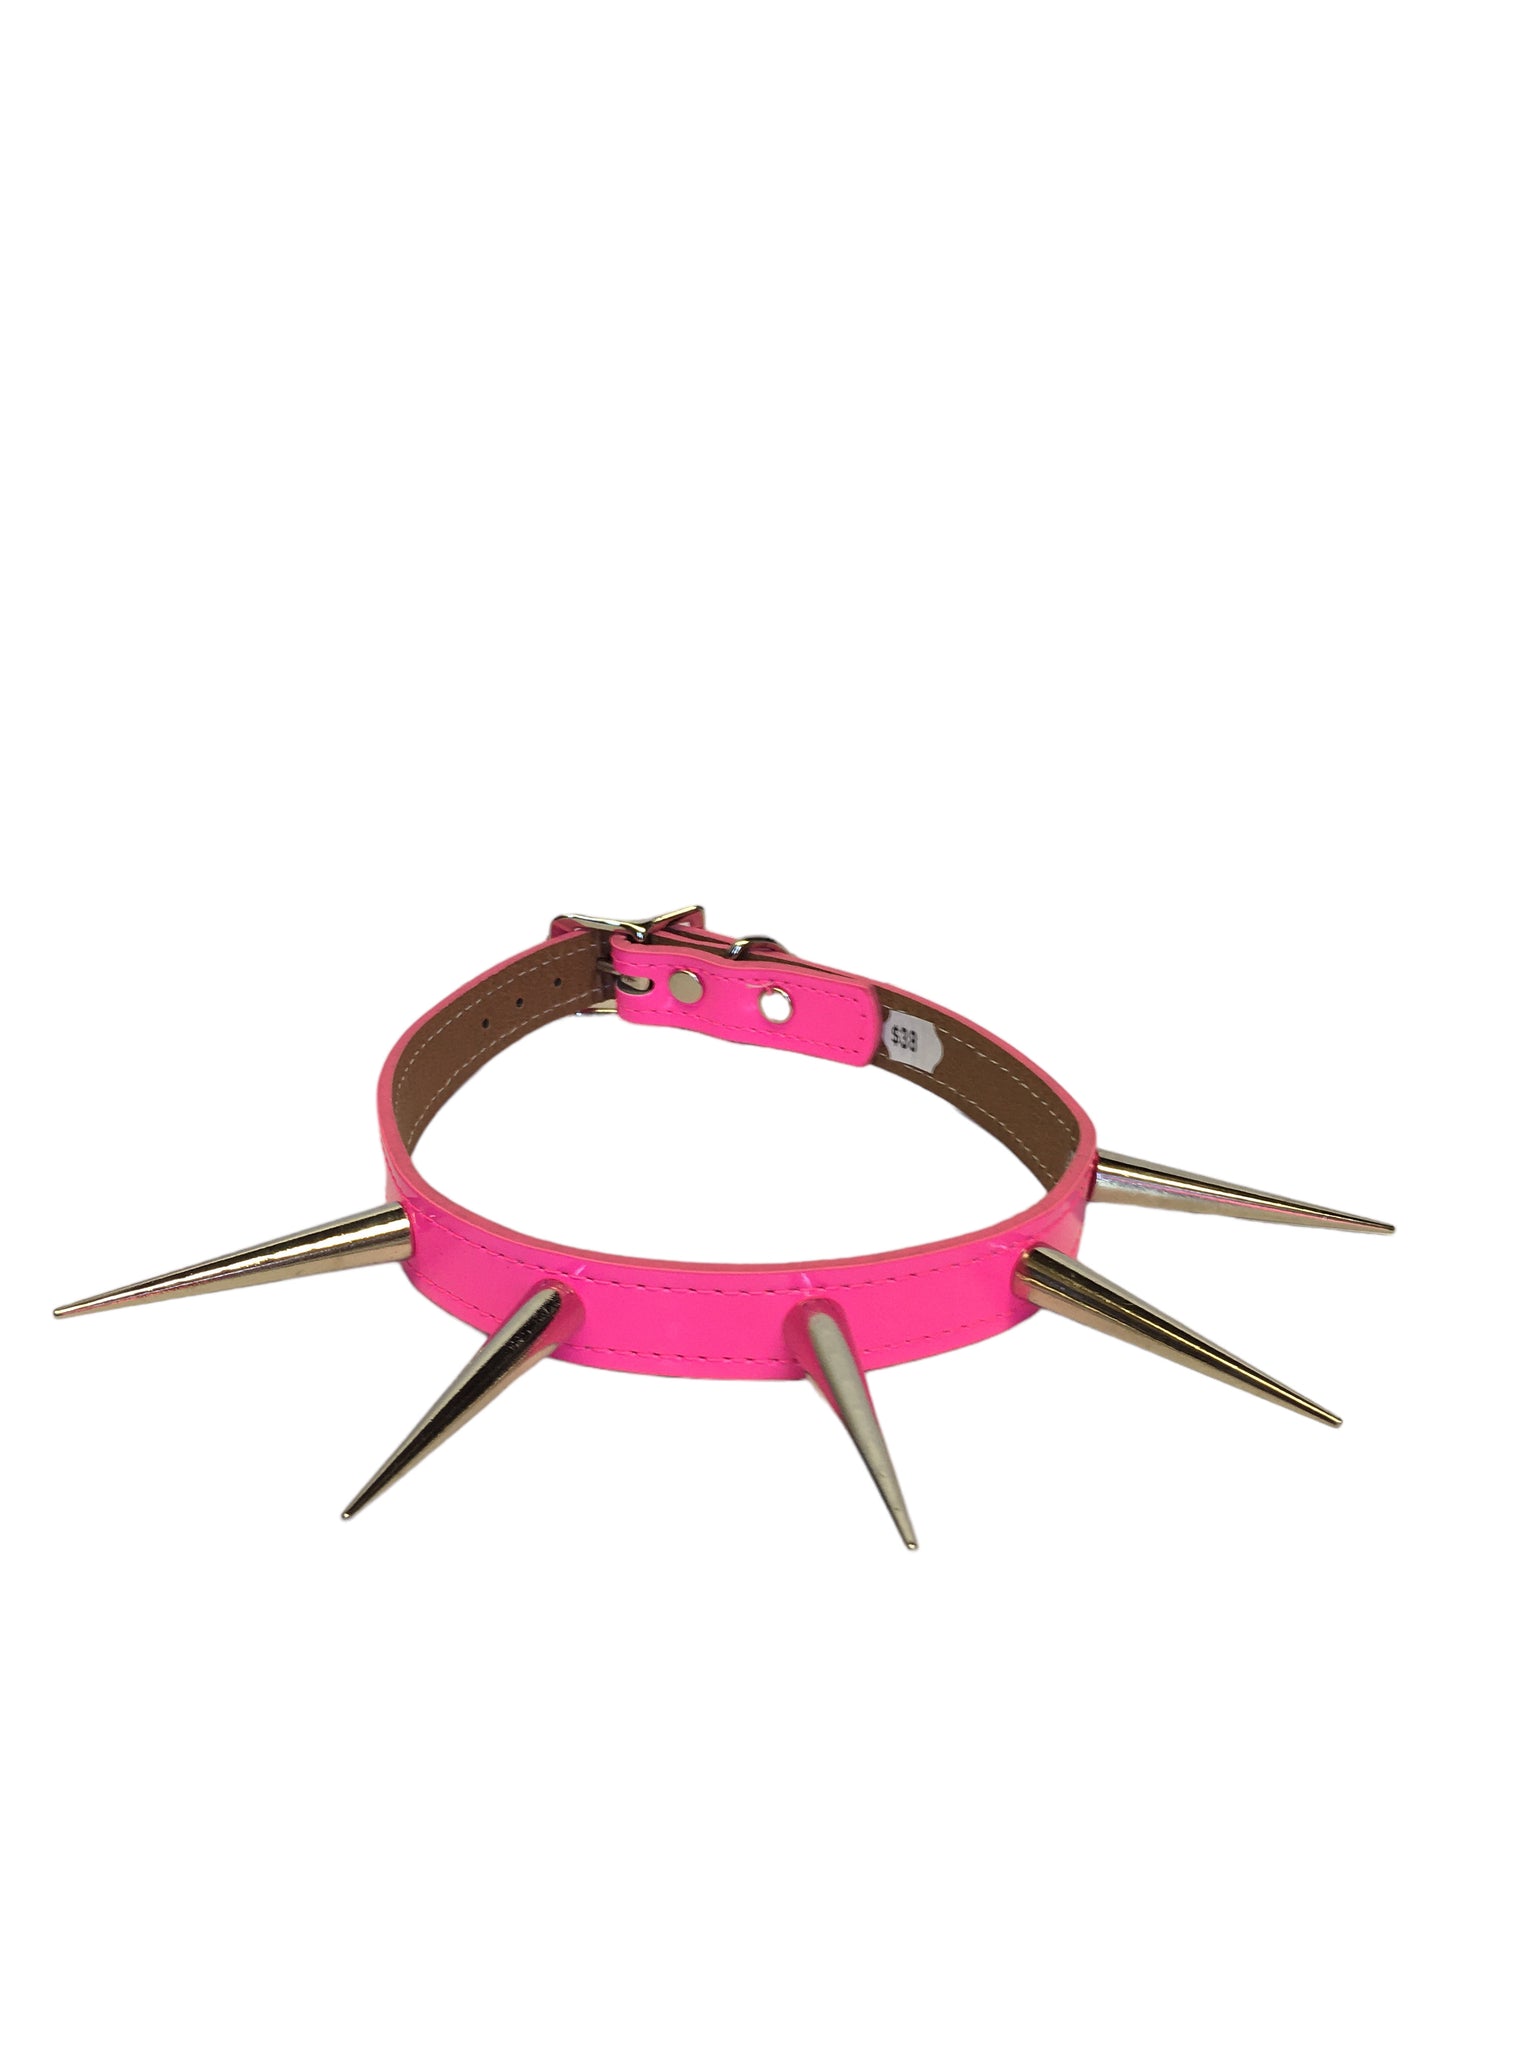 ( Unisex ) Stacy Cone Spikes Vegan Patent Leather Choker